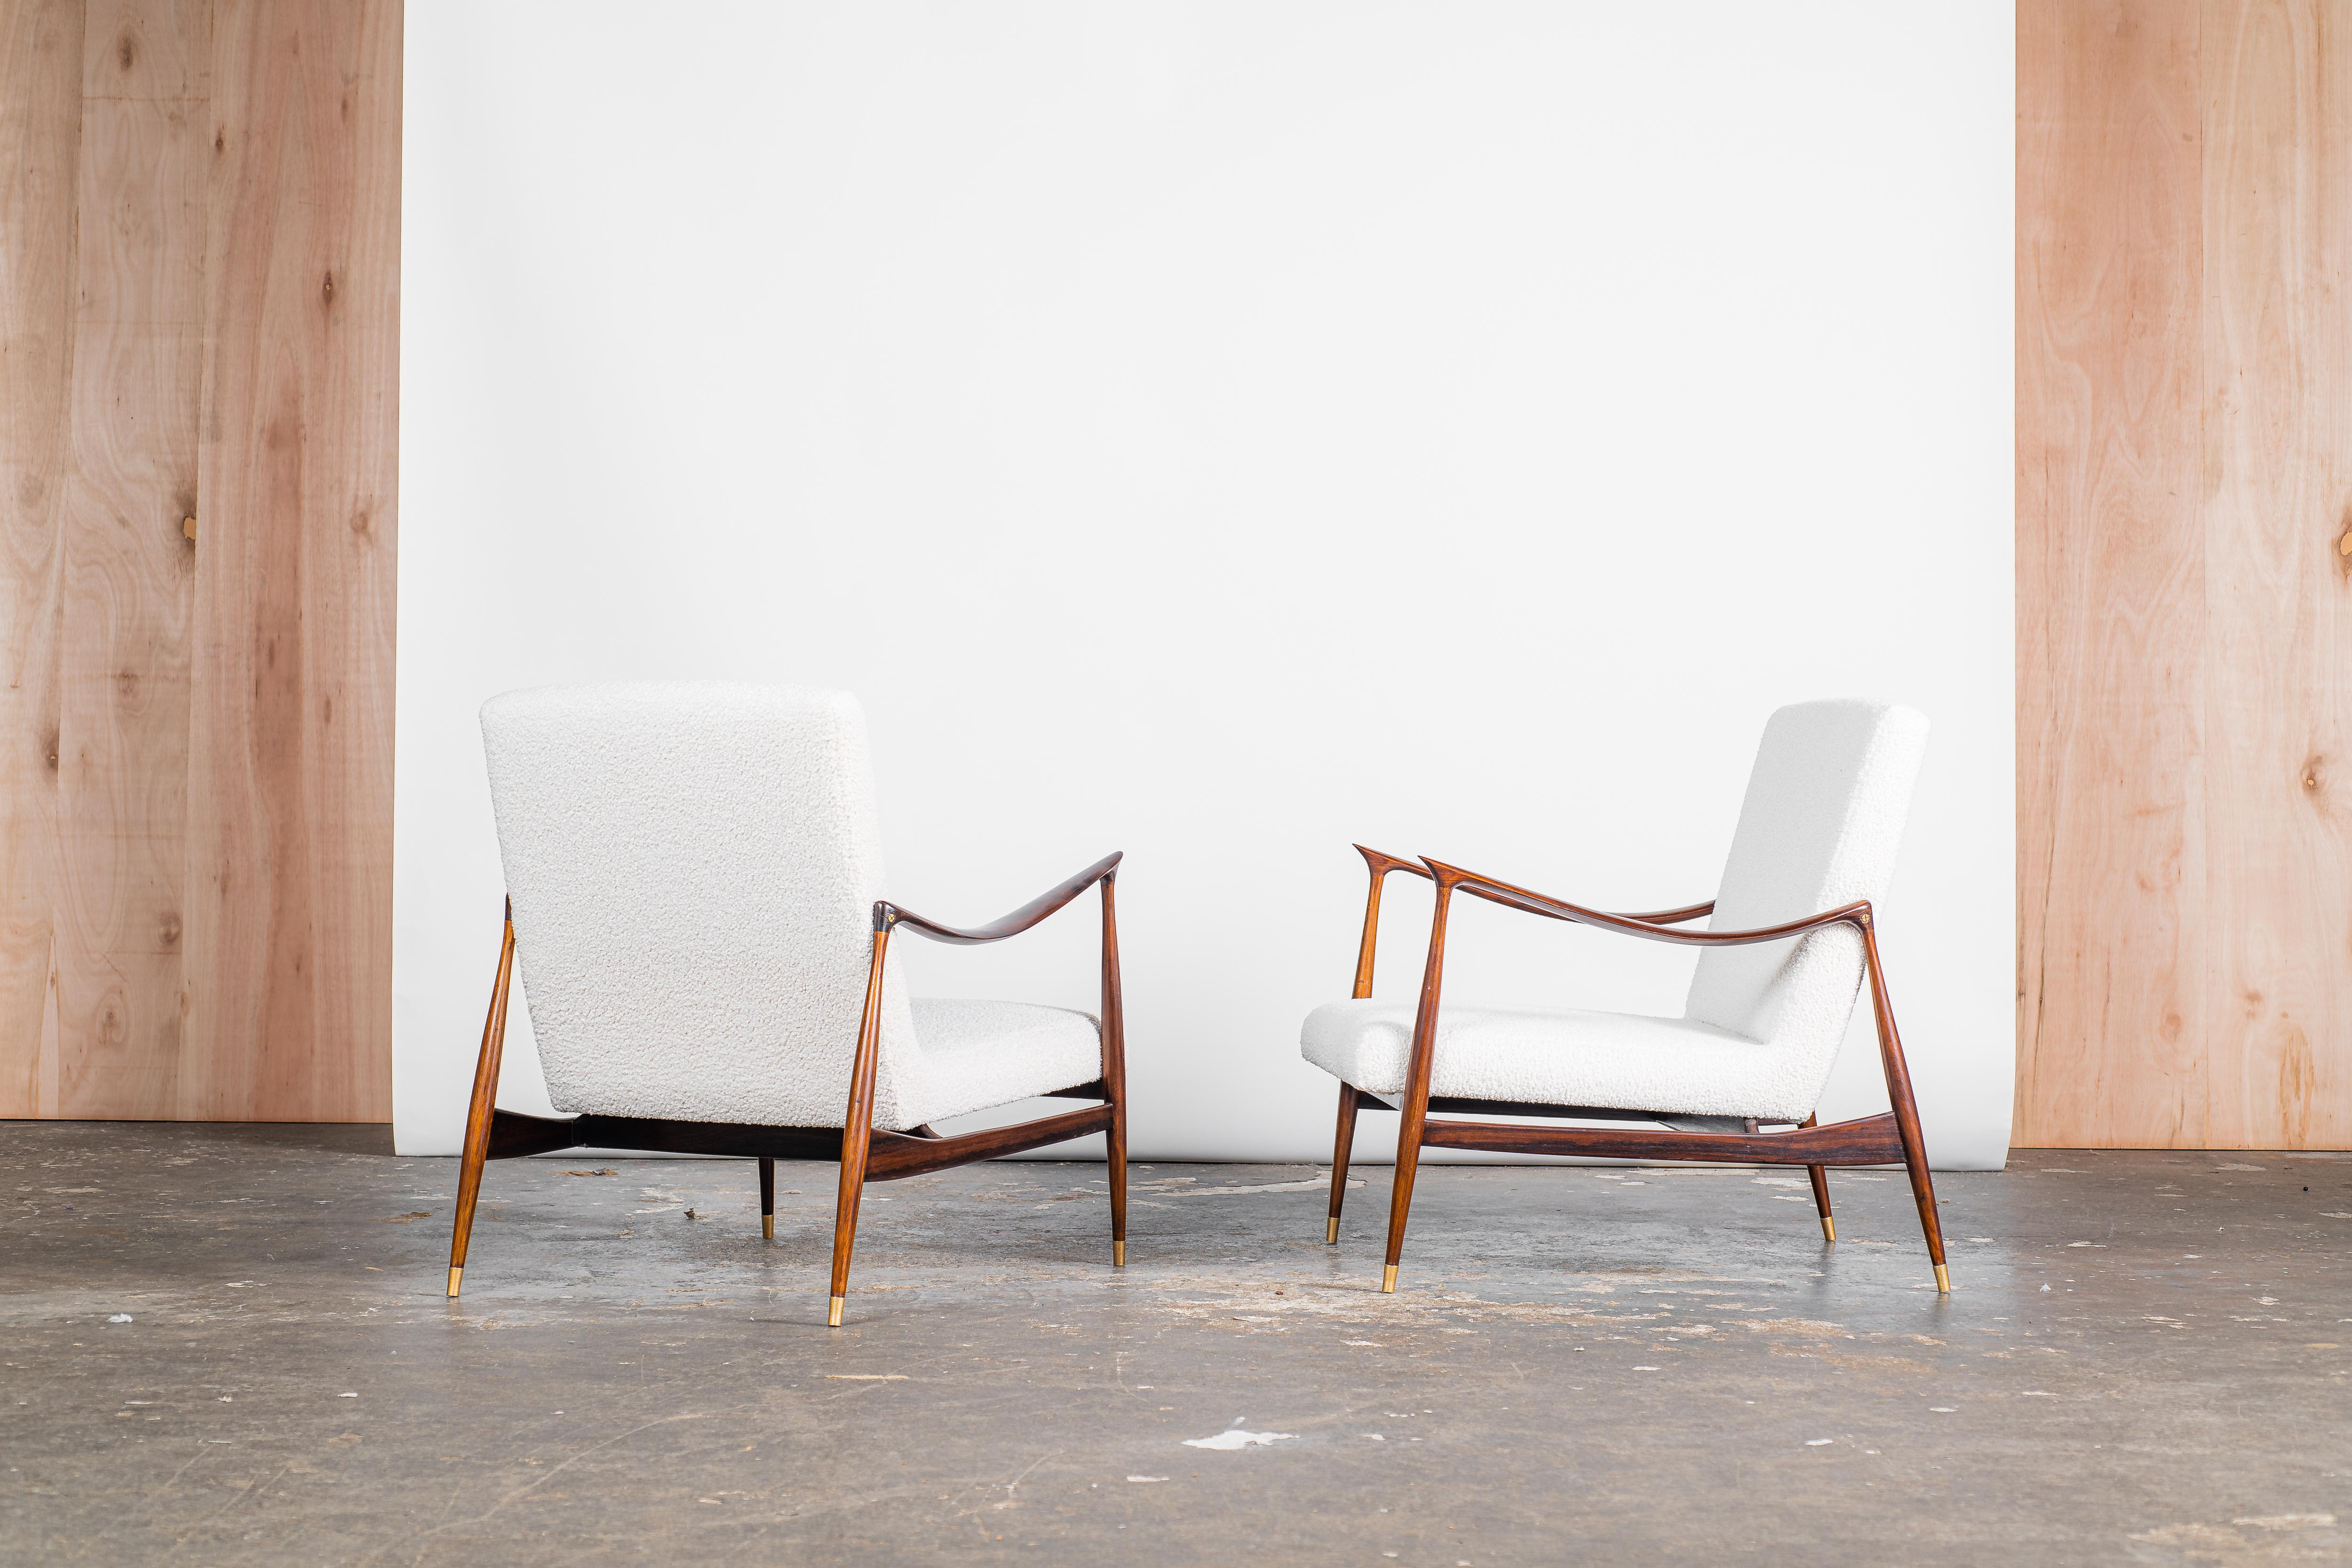 The Dinamarquesa Armchair by Jorge Zalszupin

Indulge in the epitome of luxury with the exquisite Dinamarquesa Armchair, designed by Brazil's modernist master, Jorge Zalszupin. Crafted in a harmonious fusion of white bouclé, hardwood, and brass,